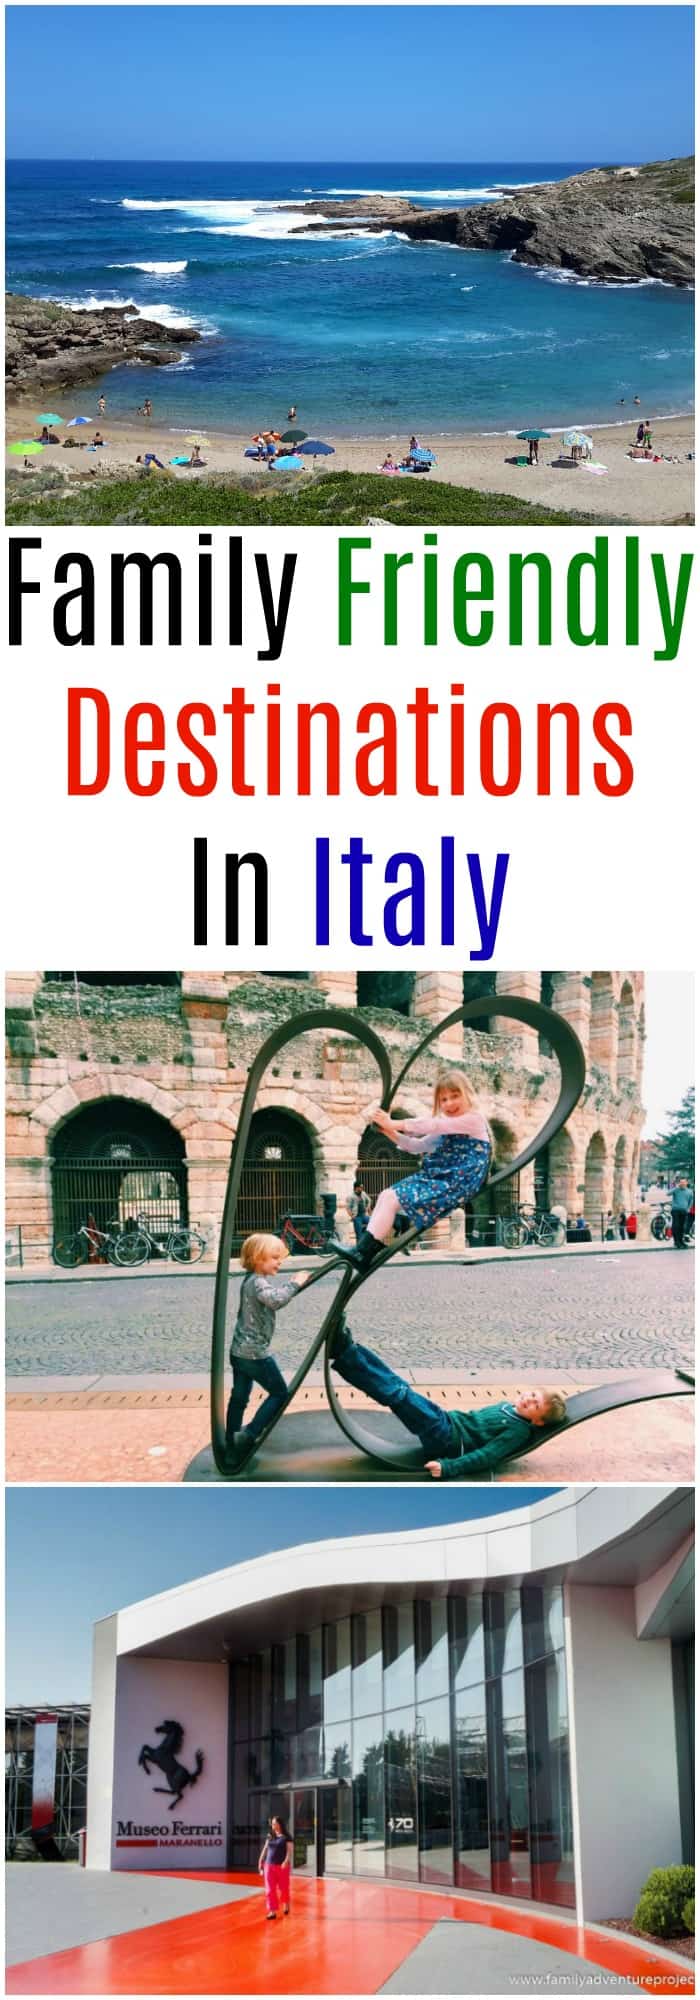  Top Family Friendly Destinations In Italy #Italy #Familytravel #ItalyWithKids #TravelWithKids 